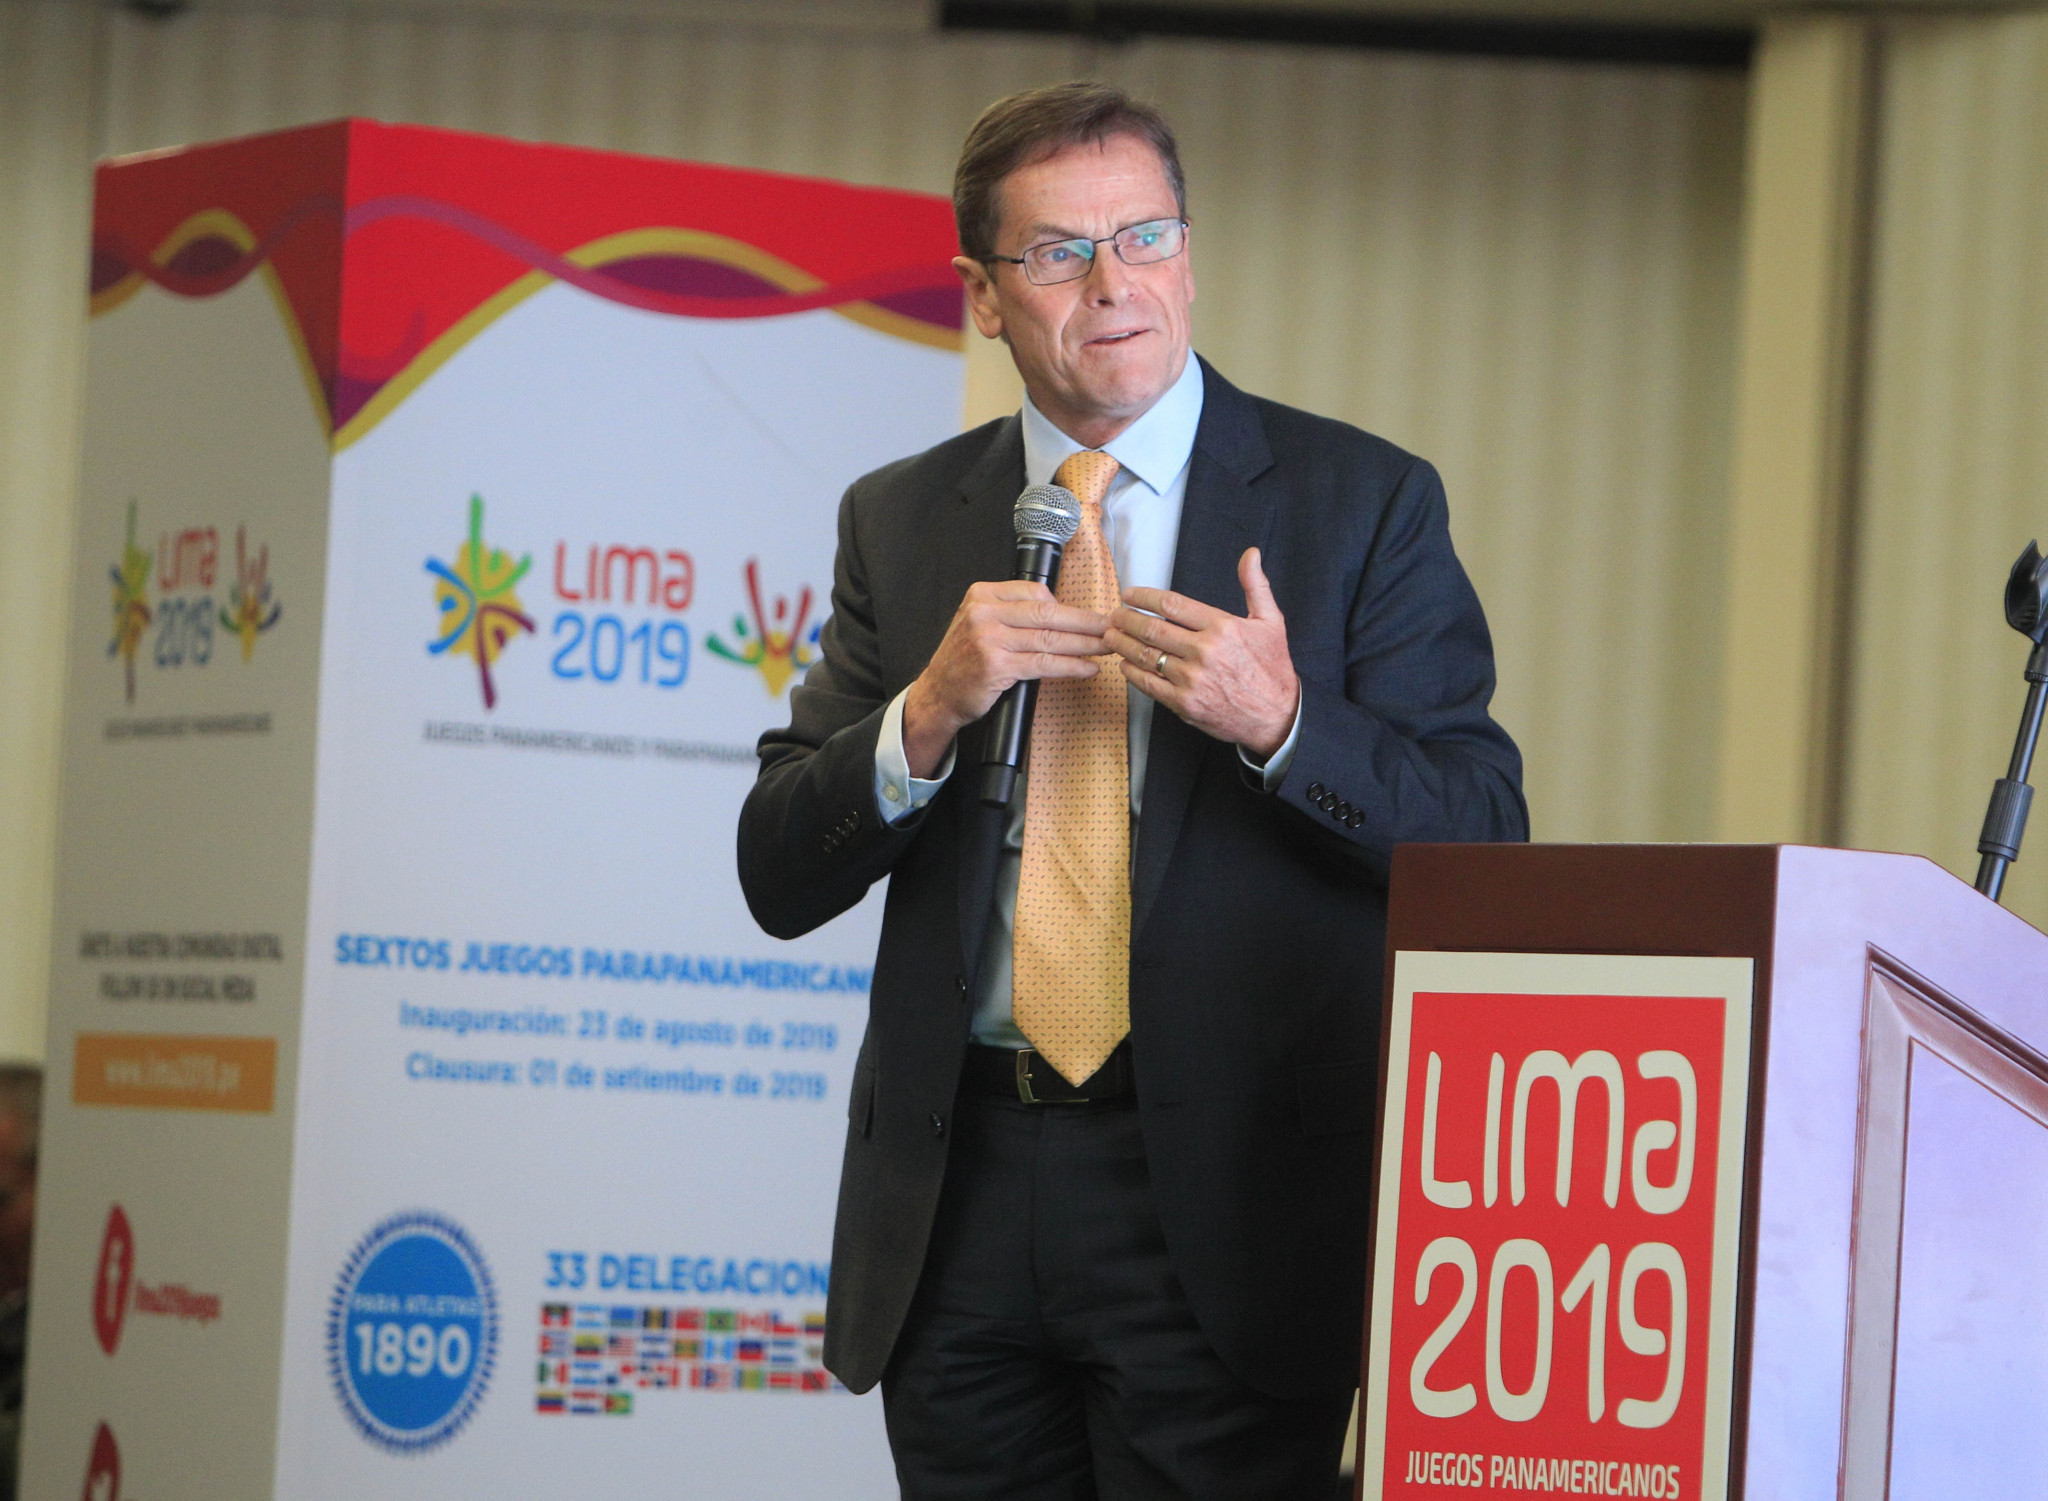 Lima 2019 President Carlos Neuhaus will present the organisation's progress with less than one year to go ©Lima 2019